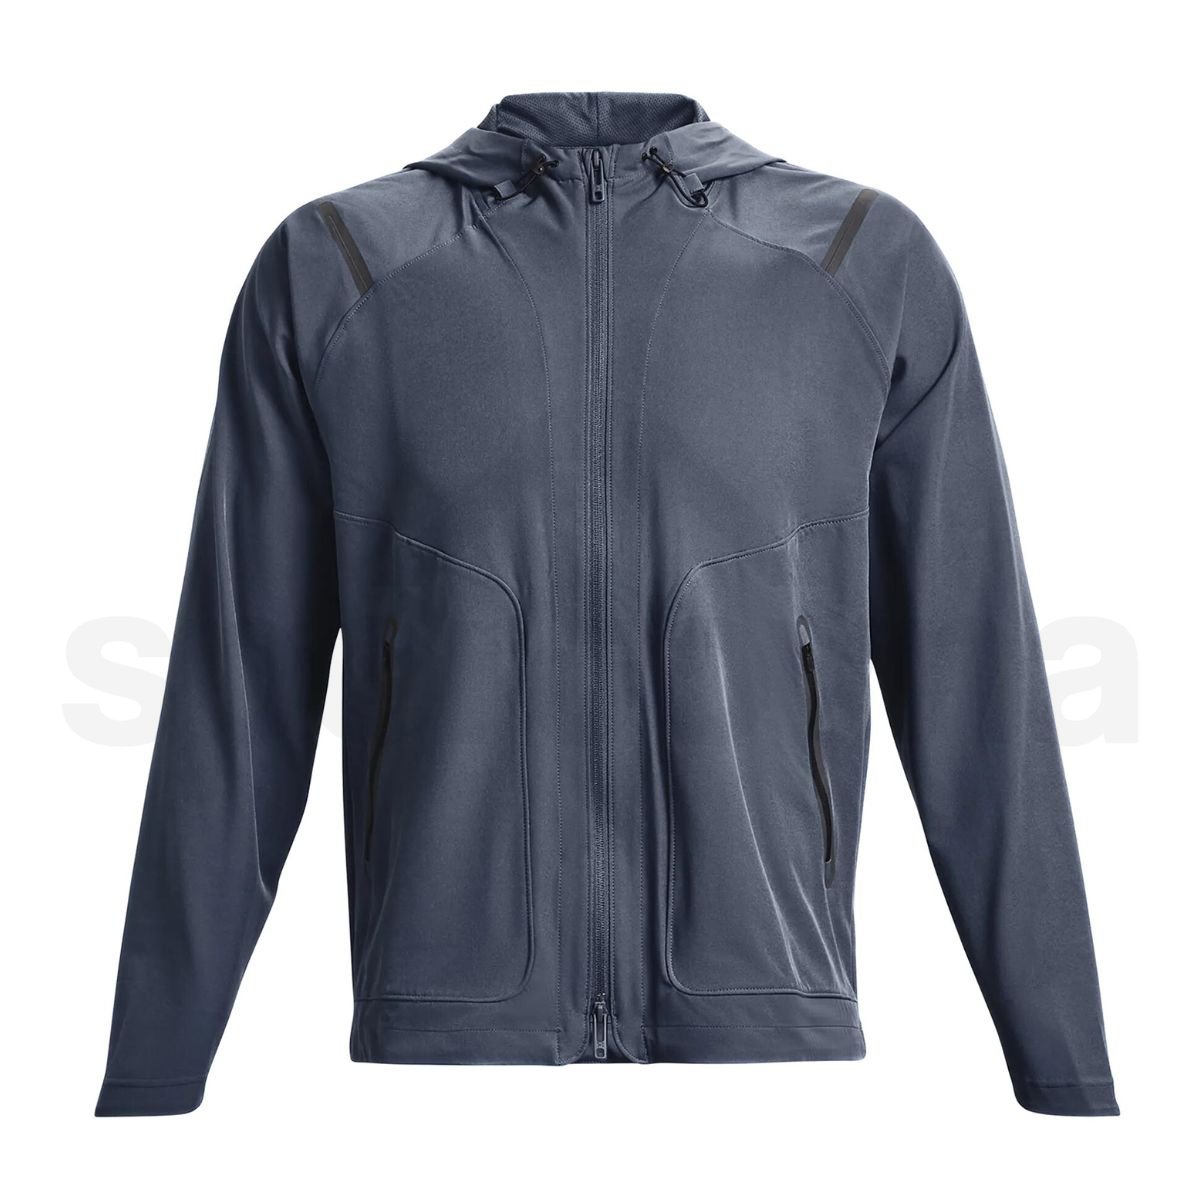 Under Armour UA Unstoppable Jacket-GRY M 1370494-044